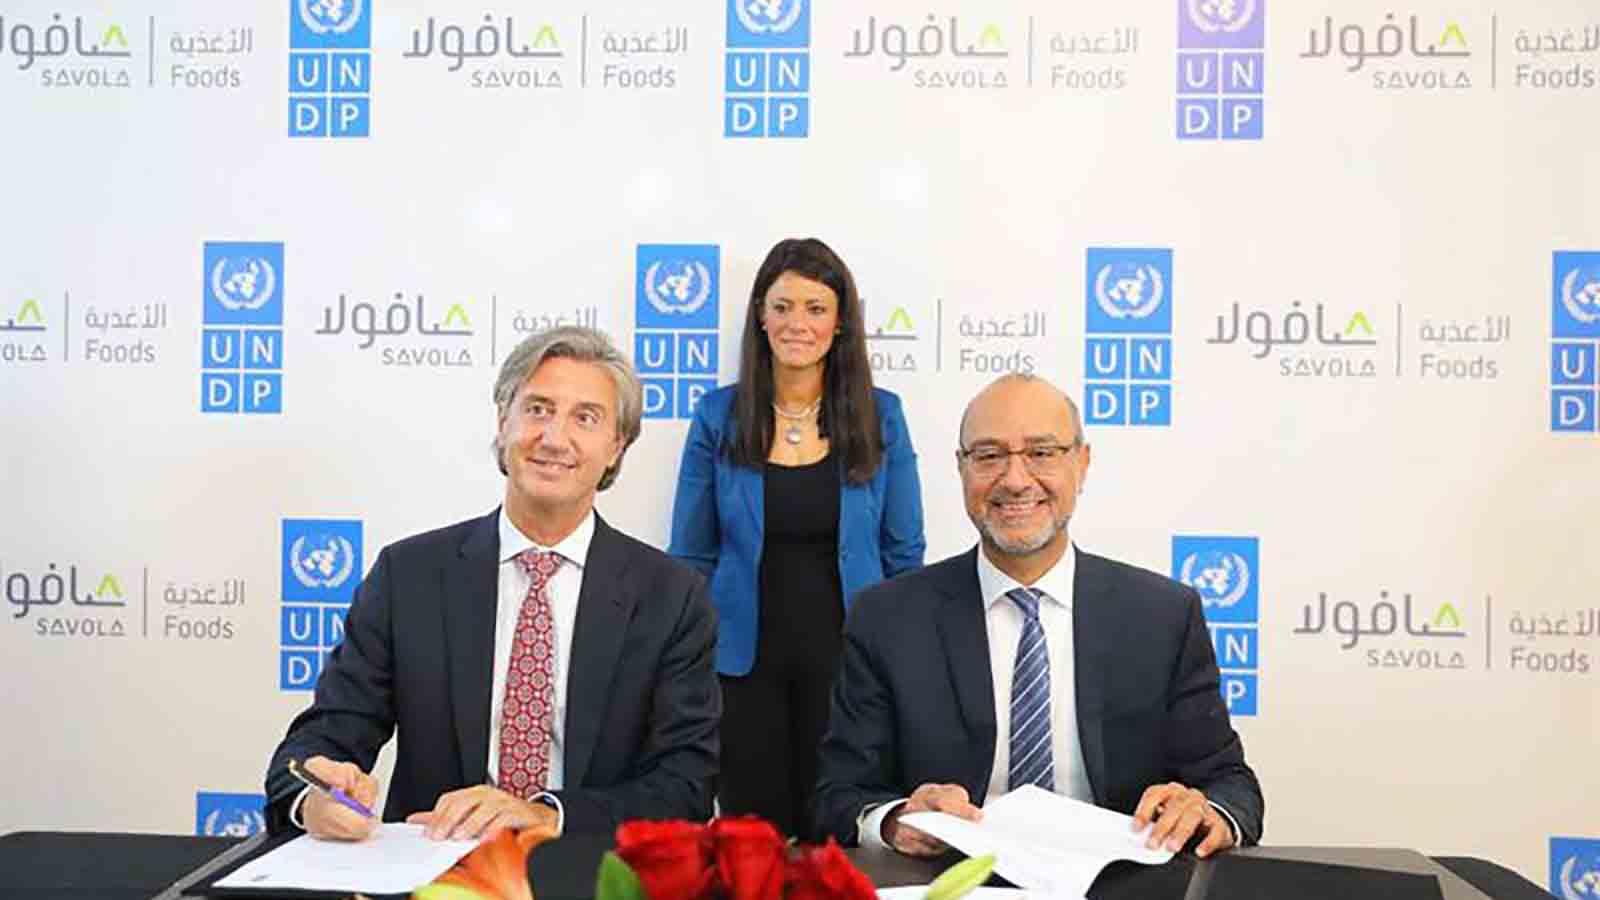 United Nations Development Programme partners Savola Foods to advance Egypt’s food security